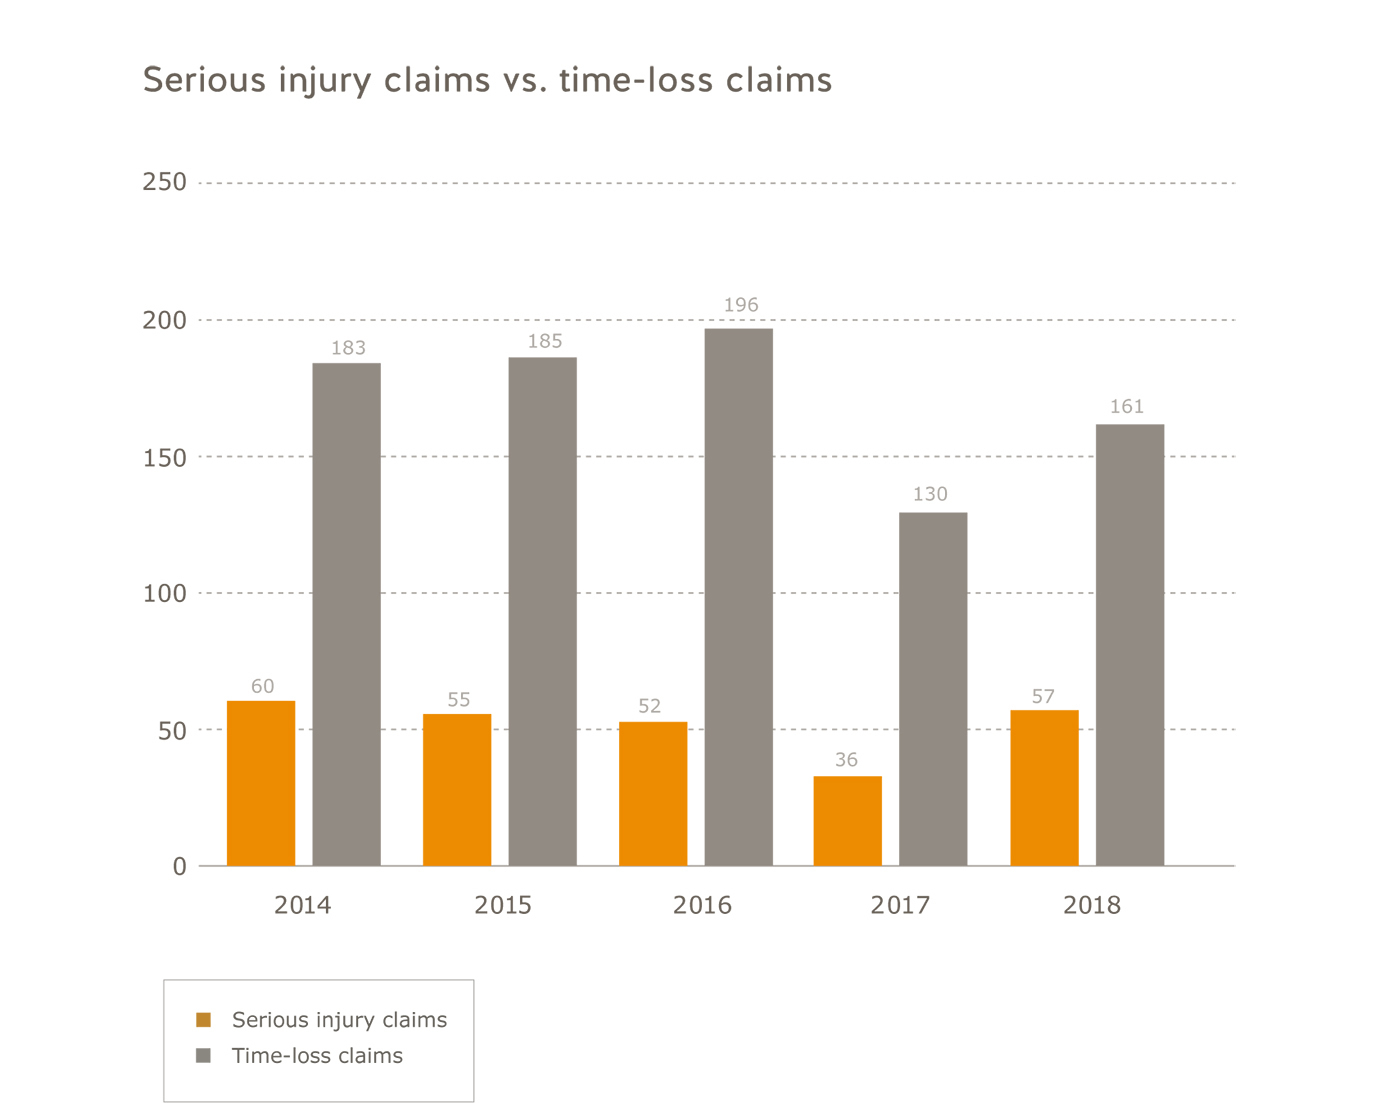 Commercial fishing sector serious injury claims vs. time-loss claims for 2014 to 2018. Serious injury claims: 2014=60; 2015=55; 2016=52; 2017=36; 2018=57. Time-loss claims: 2014=183; 2015=185; 2016=196; 2017=130; 2018=161